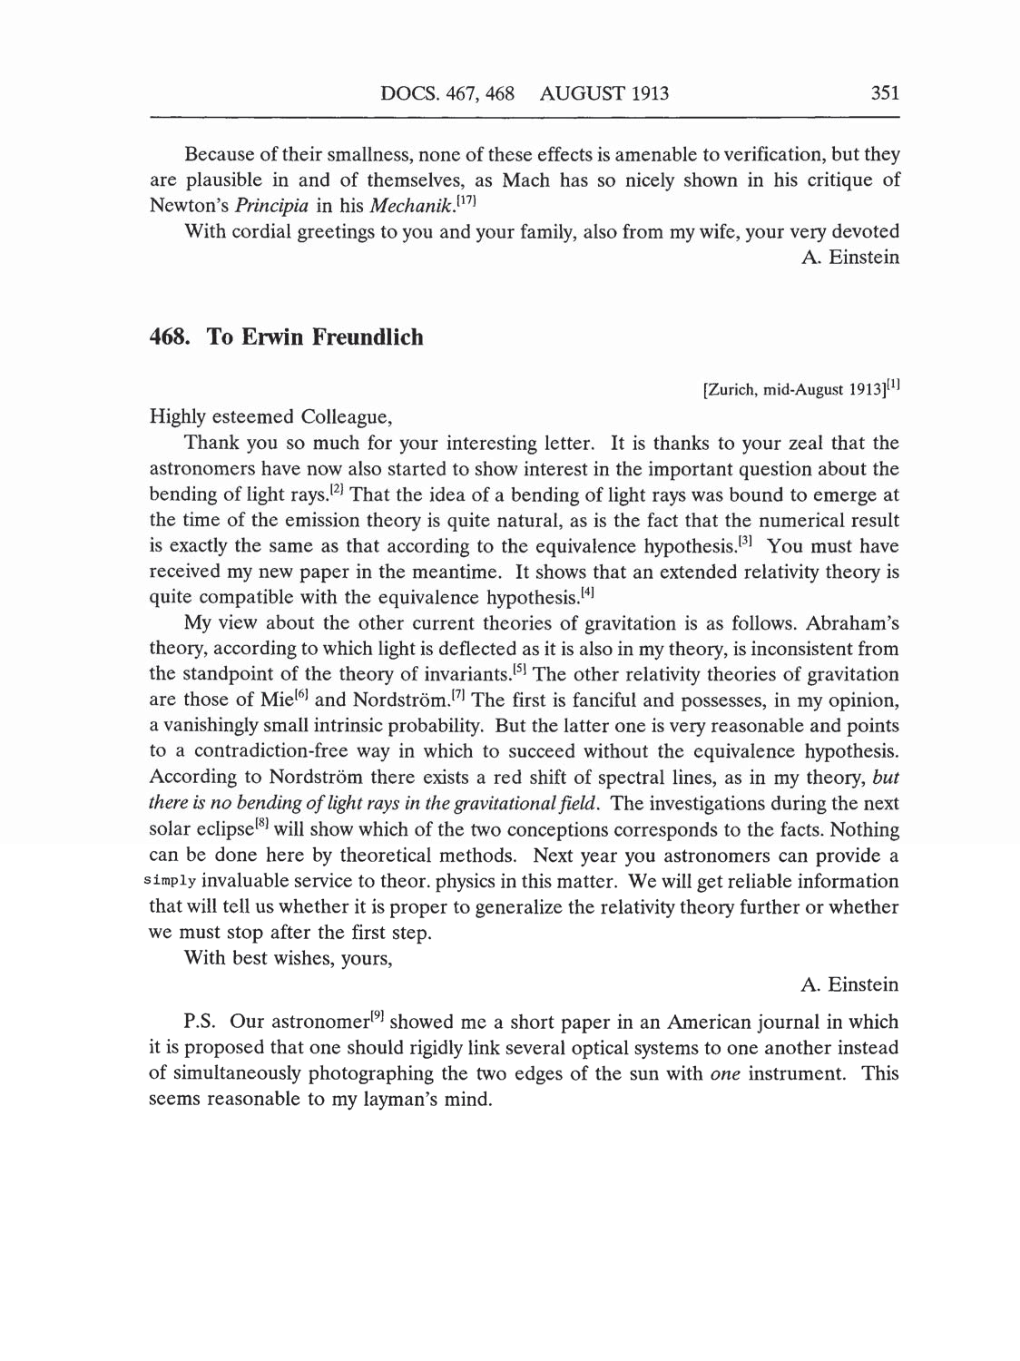 Volume 5: The Swiss Years: Correspondence, 1902-1914 (English translation supplement) page 351